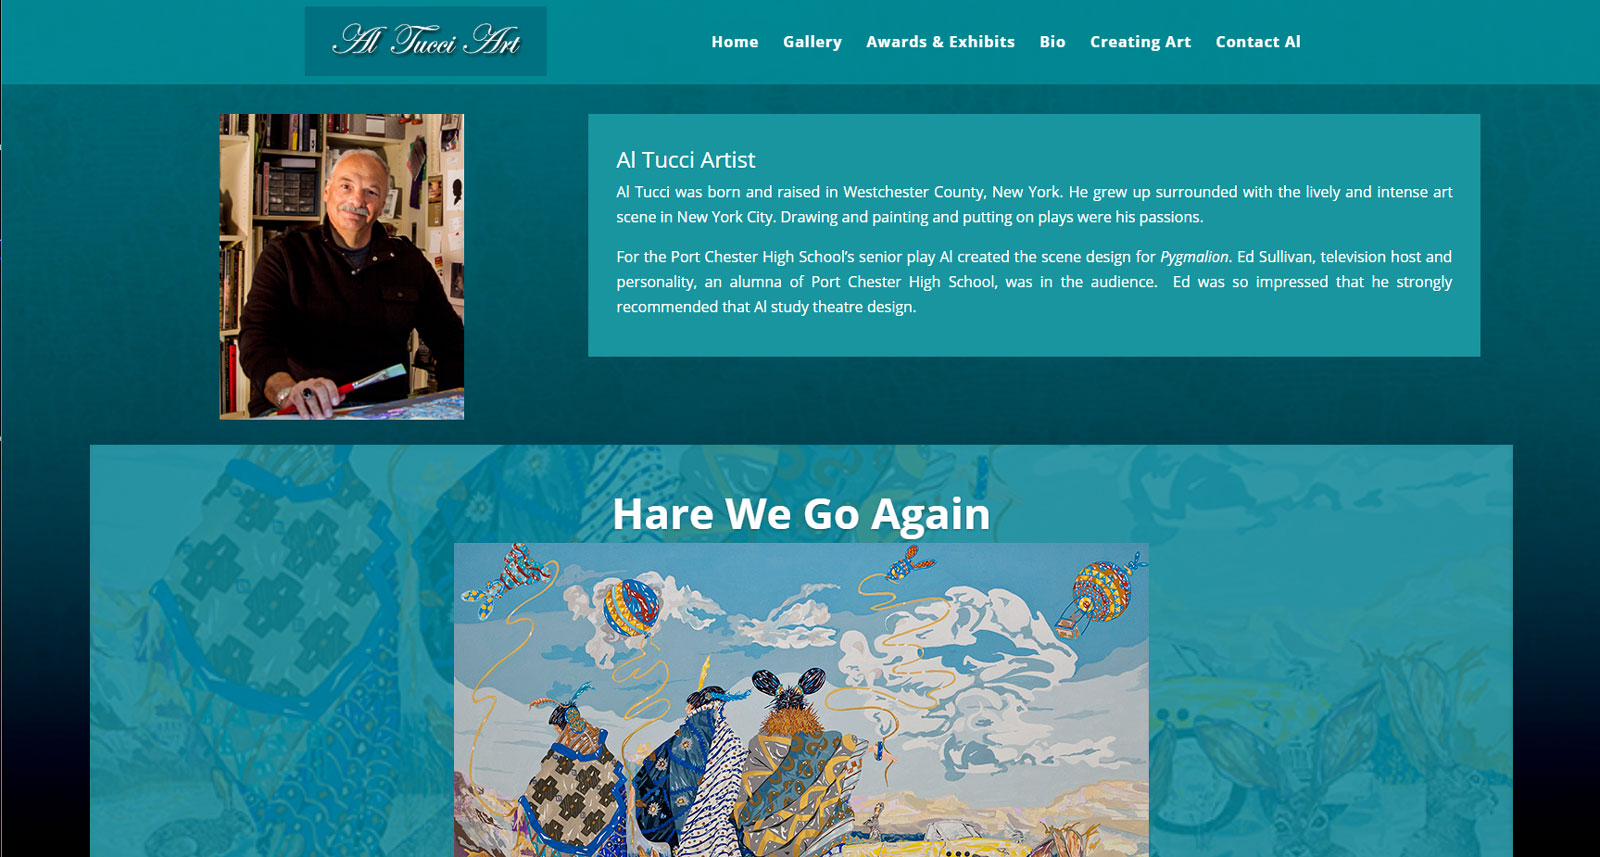 teal background and white text flank image of a man facing the camera and art below that he created Home page top screenshot of website by FastWinn Web